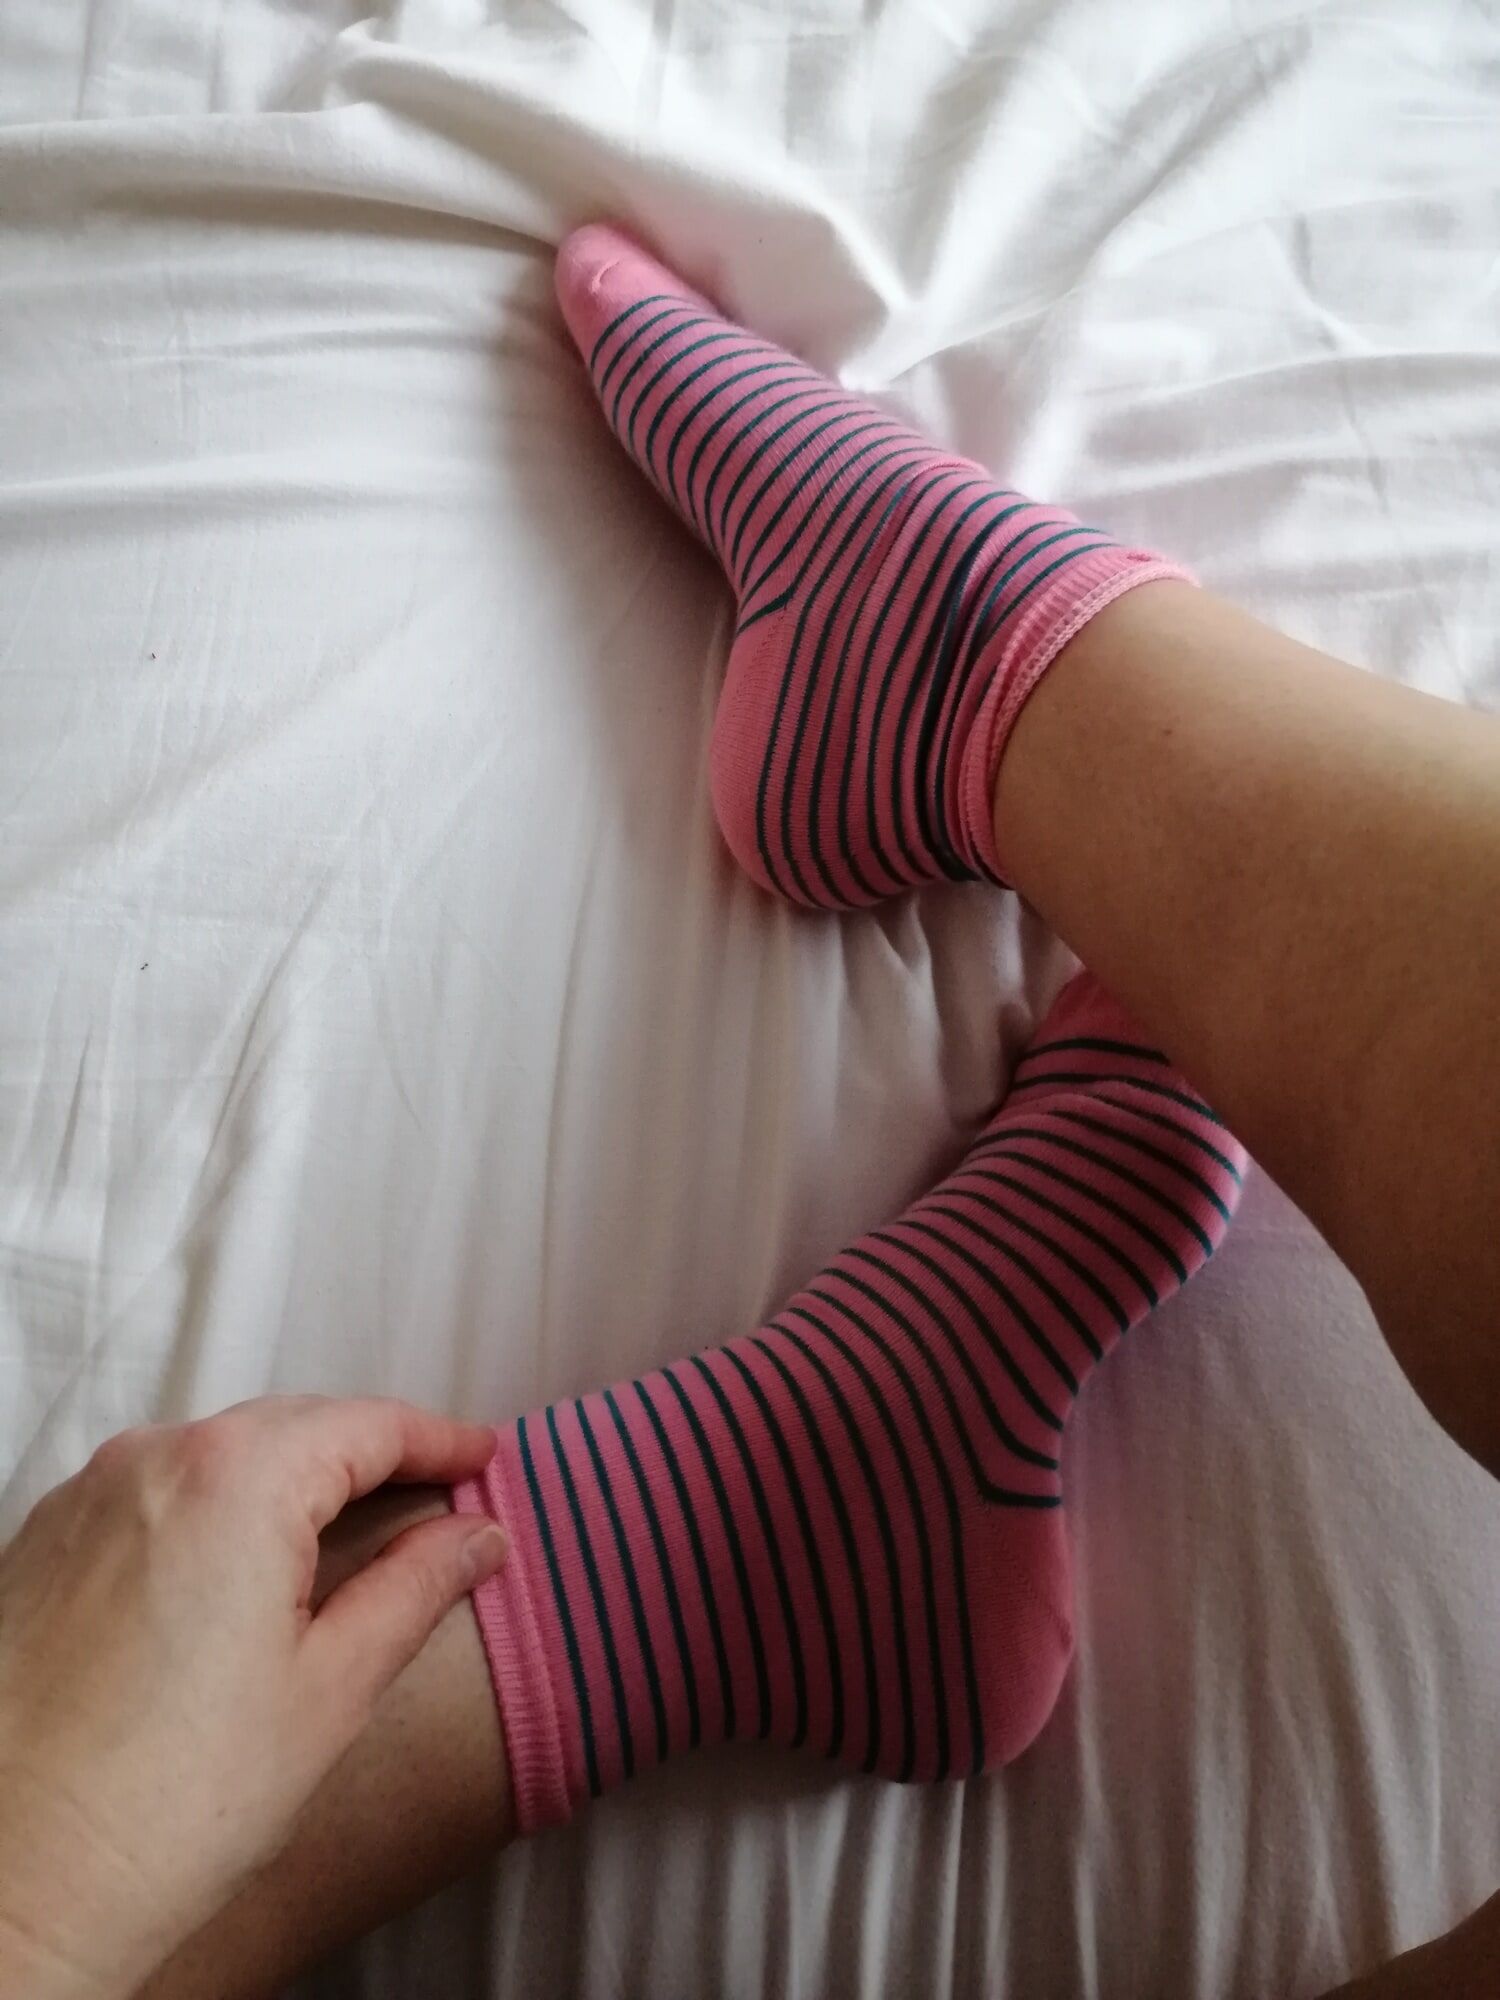 MILF Kitty Queen in her pink socks and panties - PAWG #16